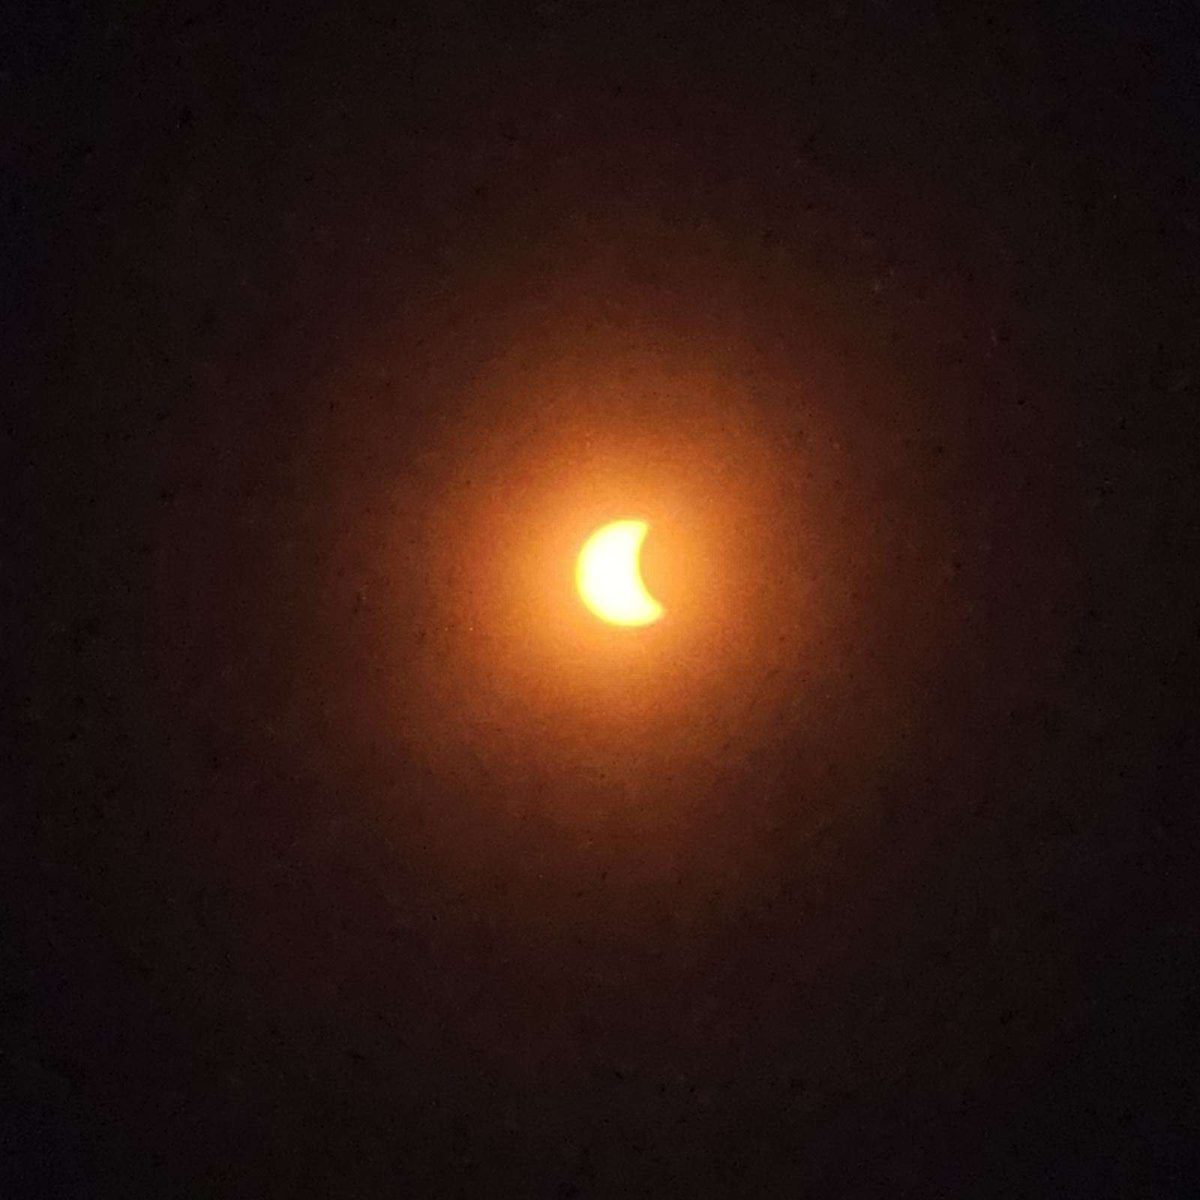 The Solar Eclipse at 1:08 p.m. in Clarkson, AR